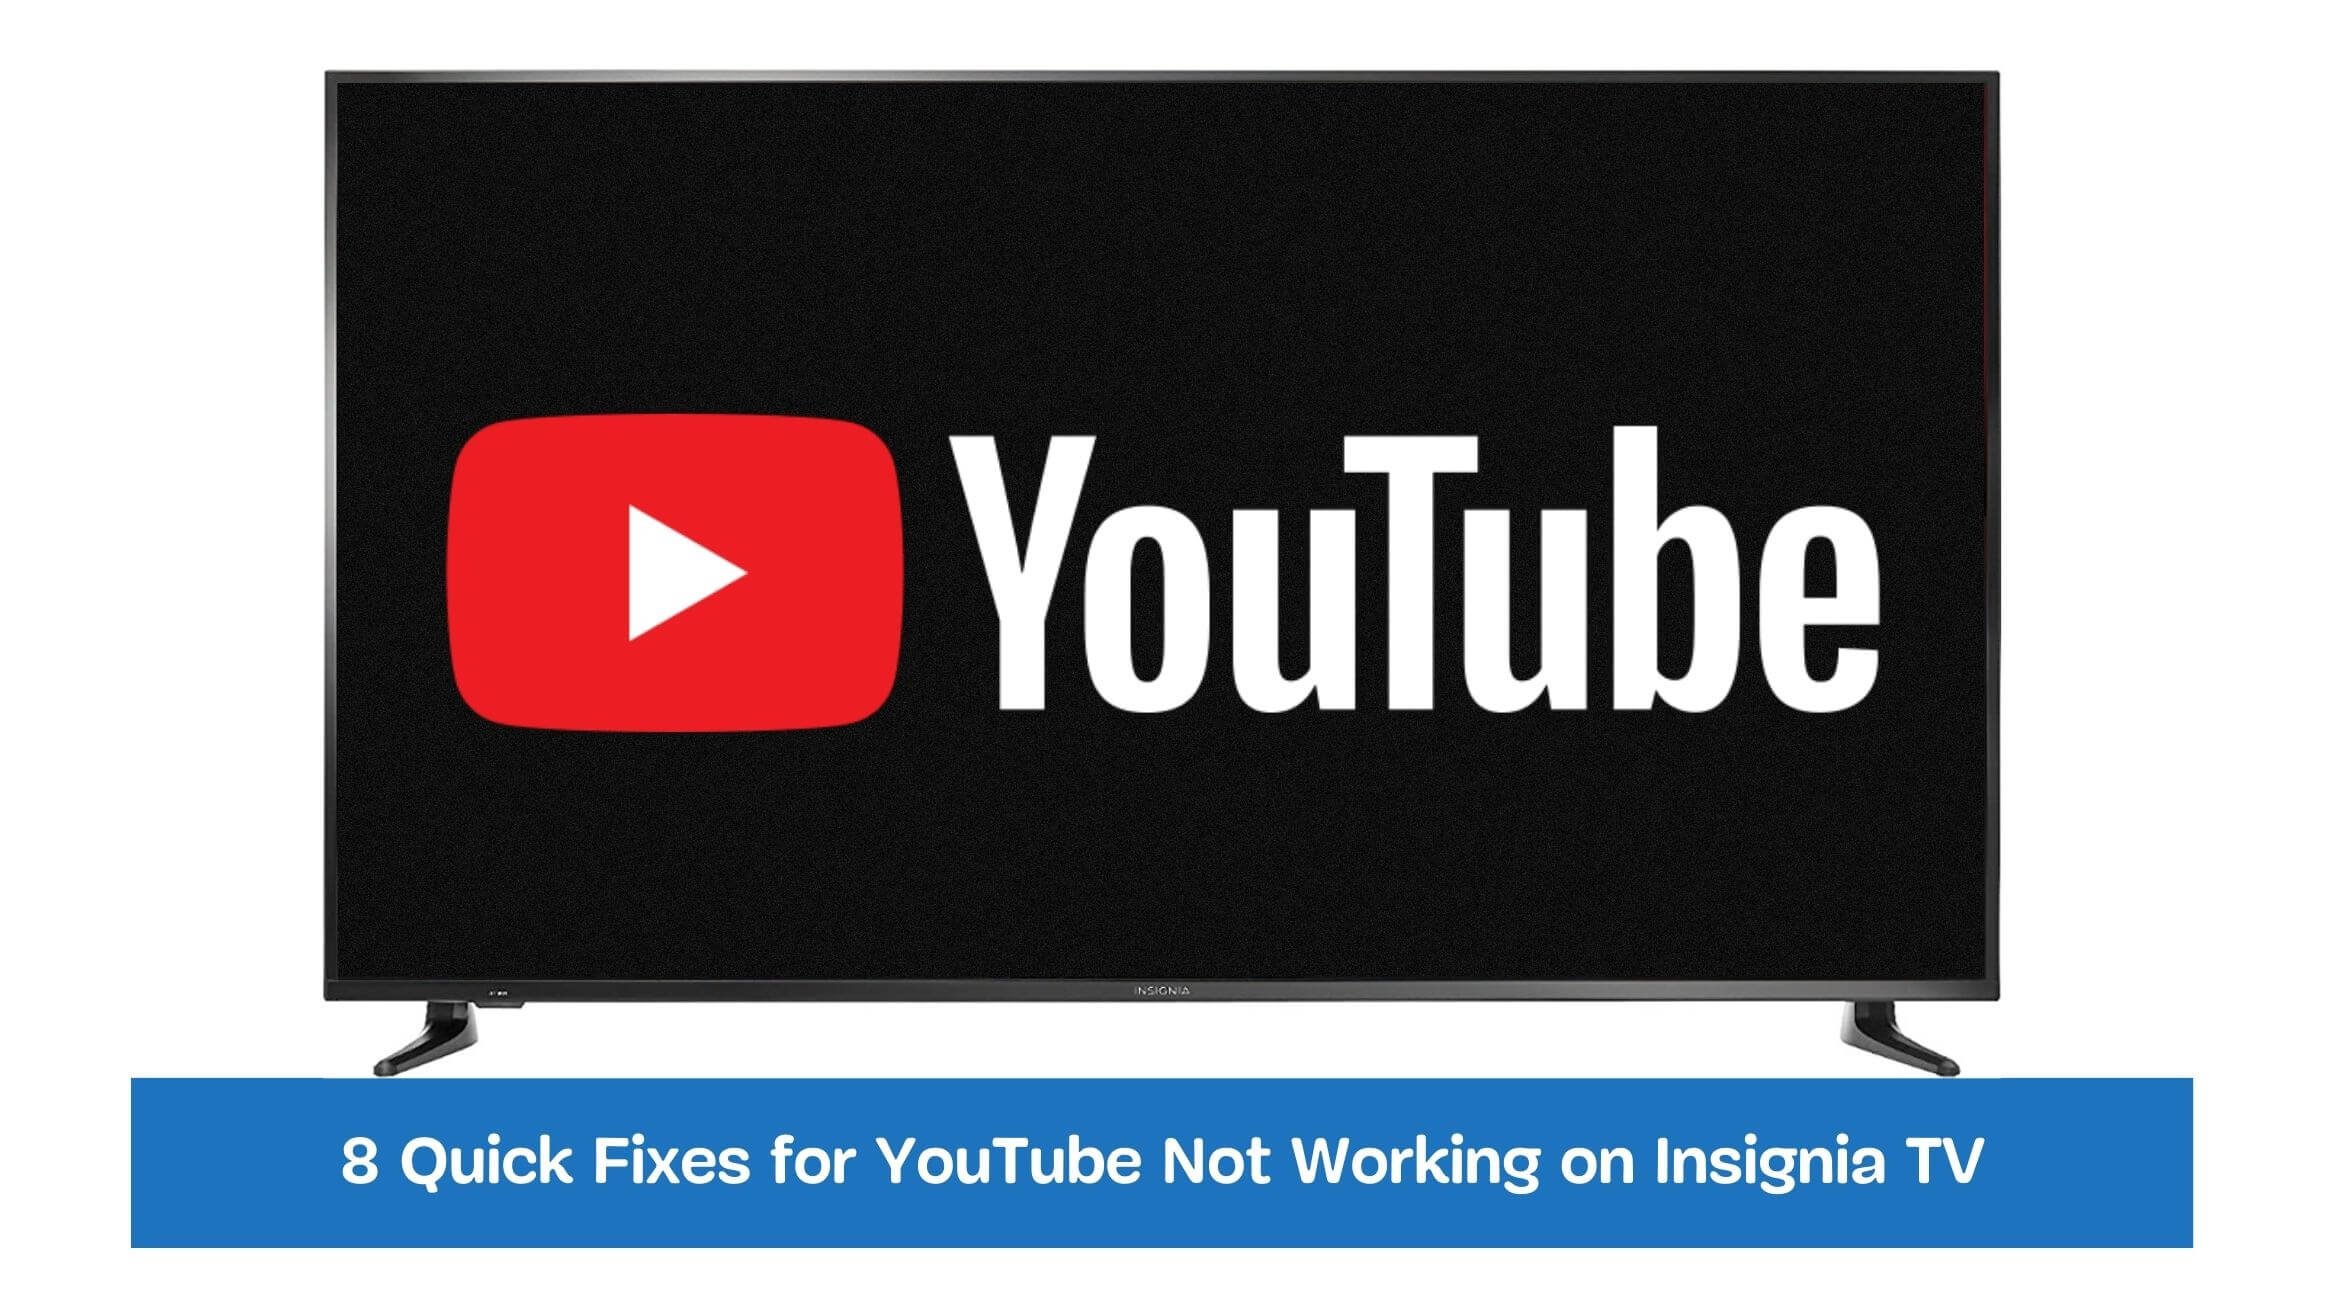 8 Quick Fixes for YouTube Not Working on Insignia TV